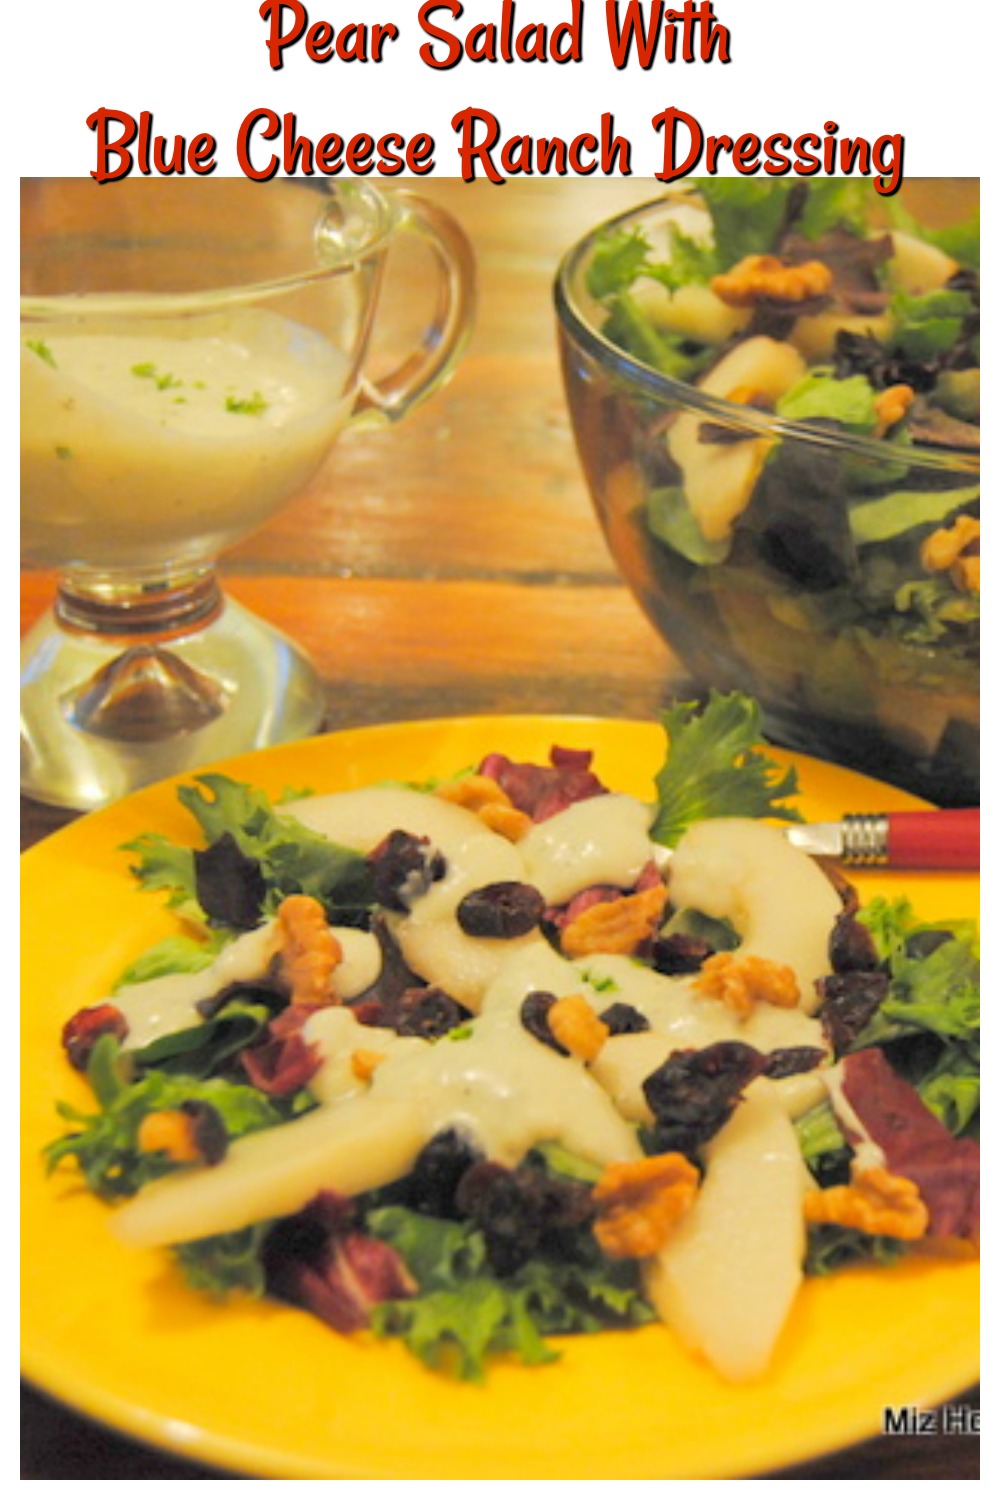 Pear Salad With Blue Cheese Ranch Dressing